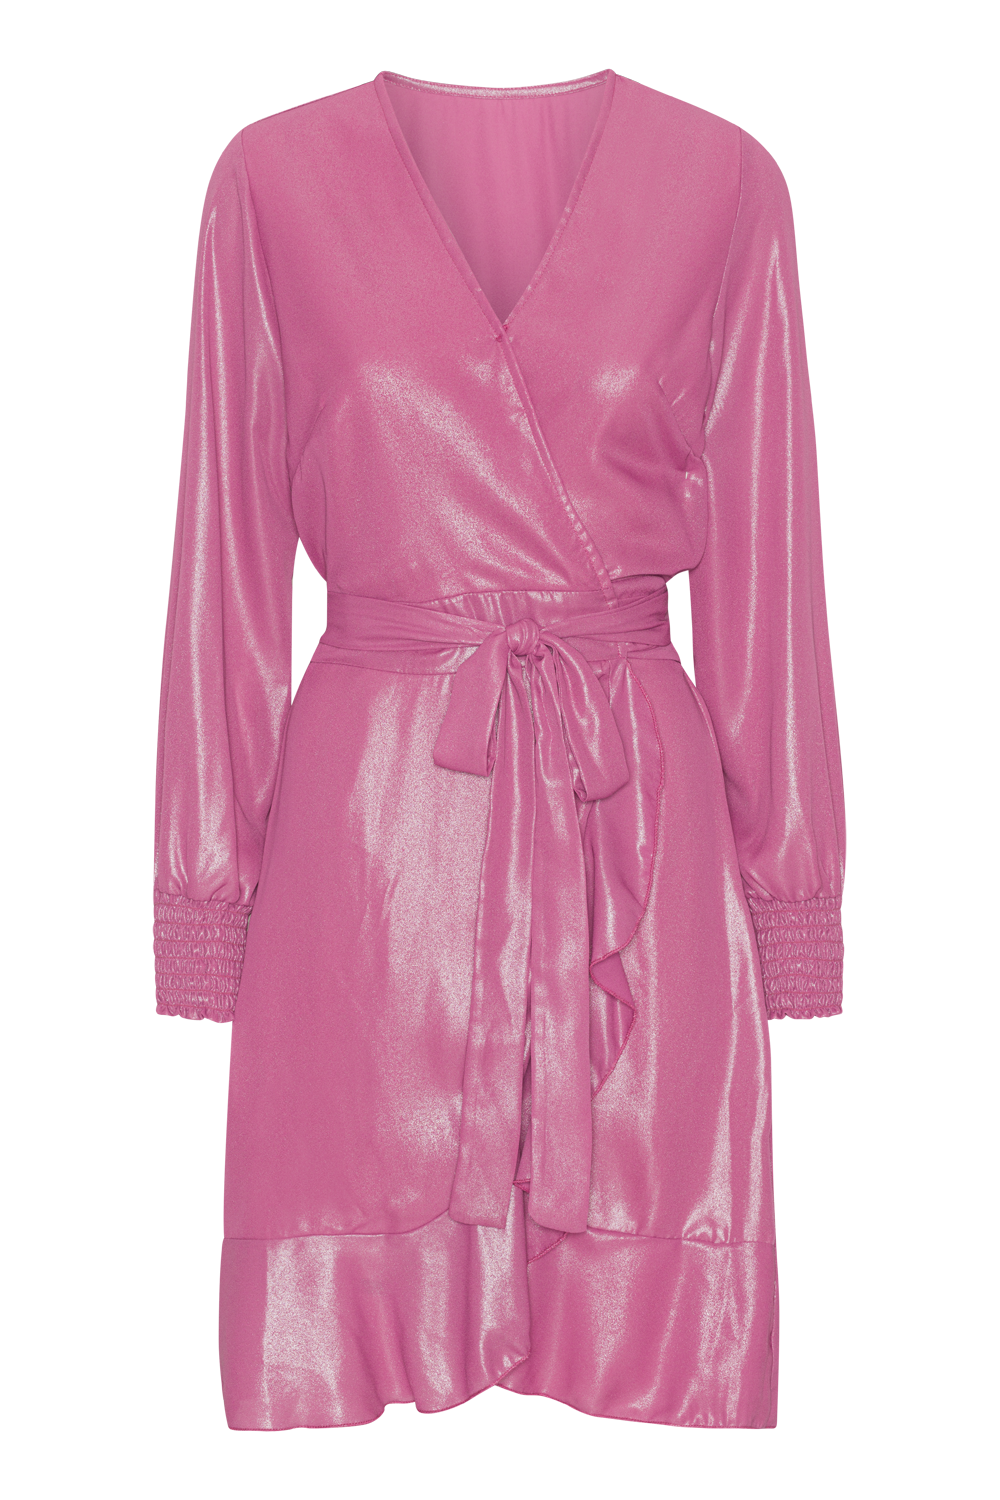 Milly LS Shimmer Wrap Dress Pink